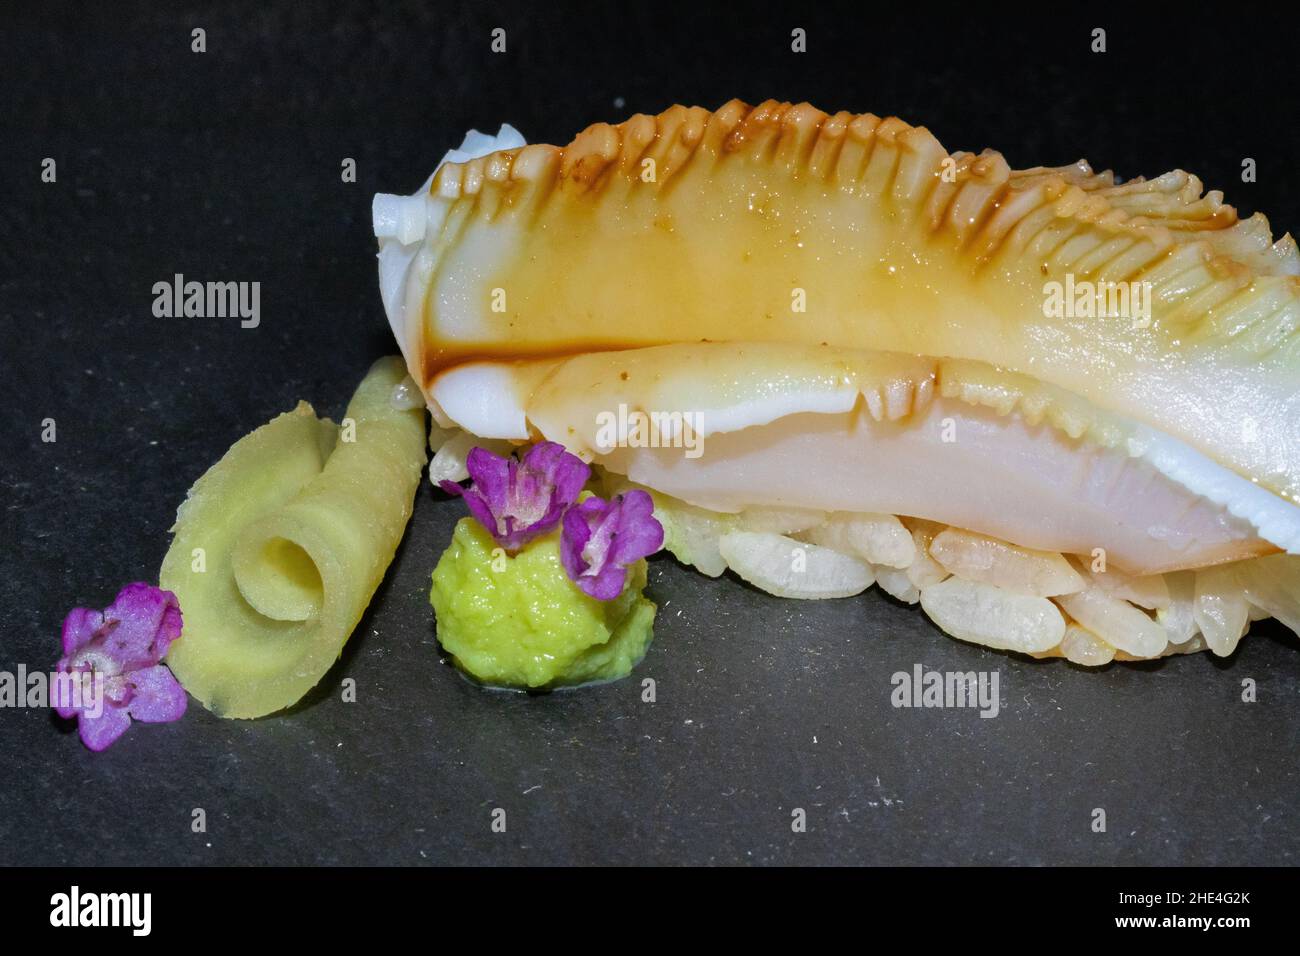 Closeup of a well prepared seashell that looks delicious with its sauce Stock Photo